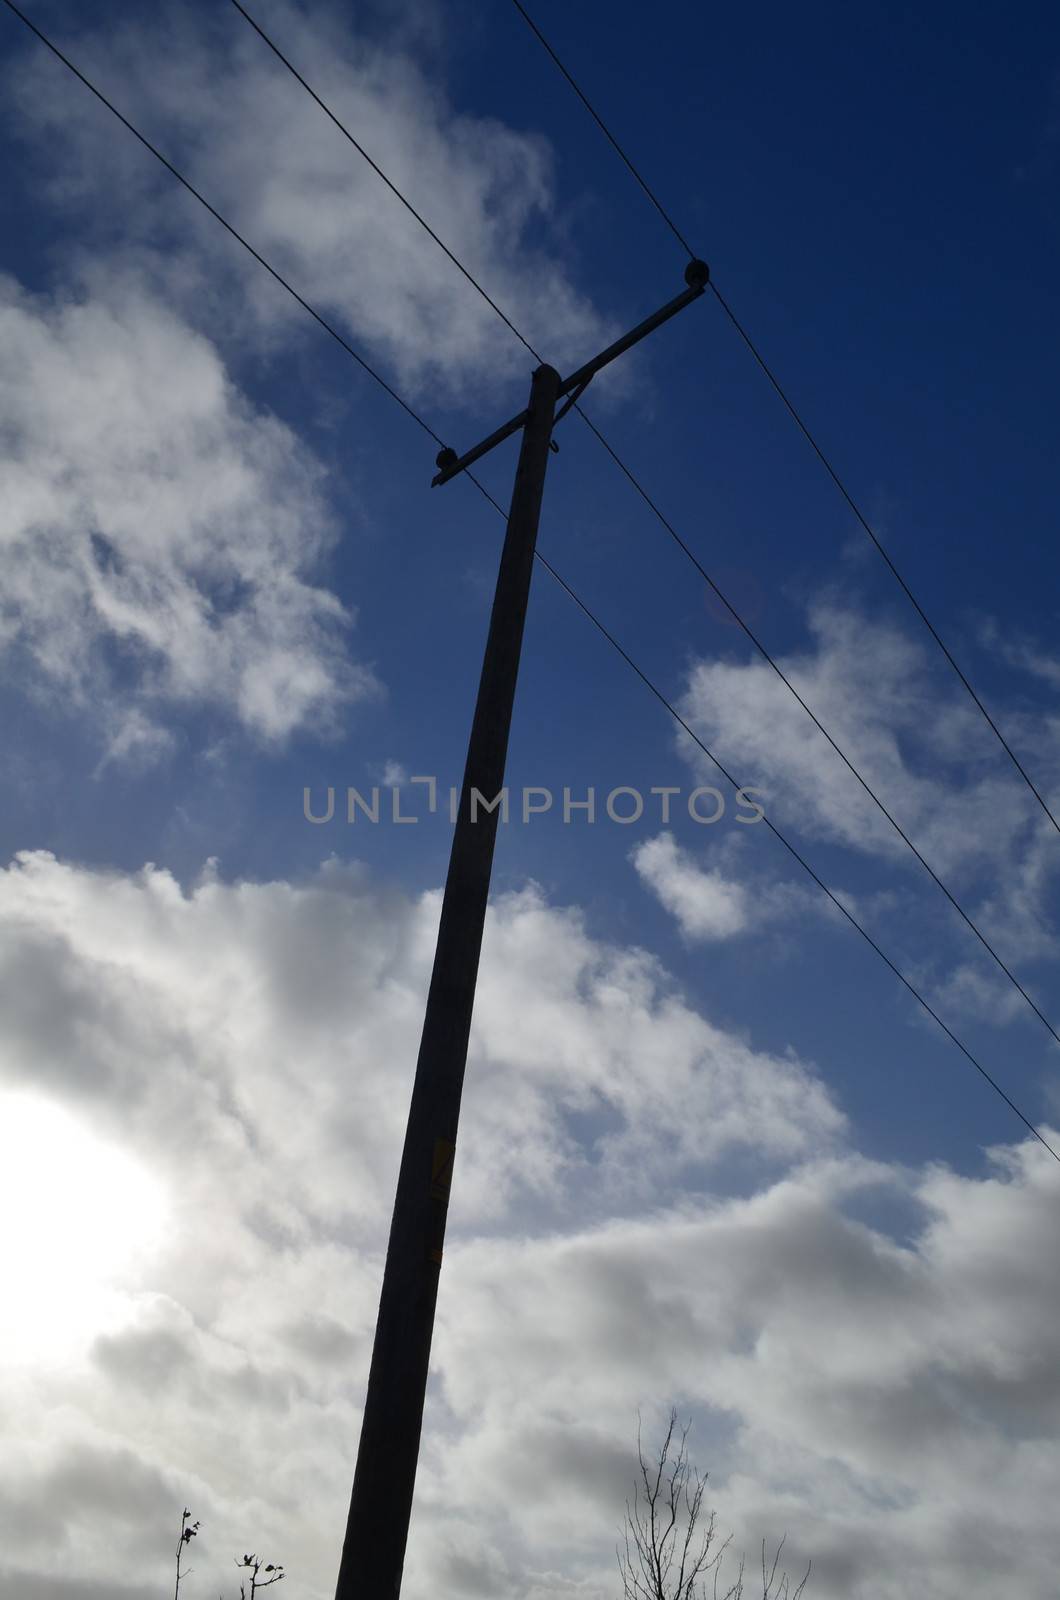 Electricity pole. by bunsview